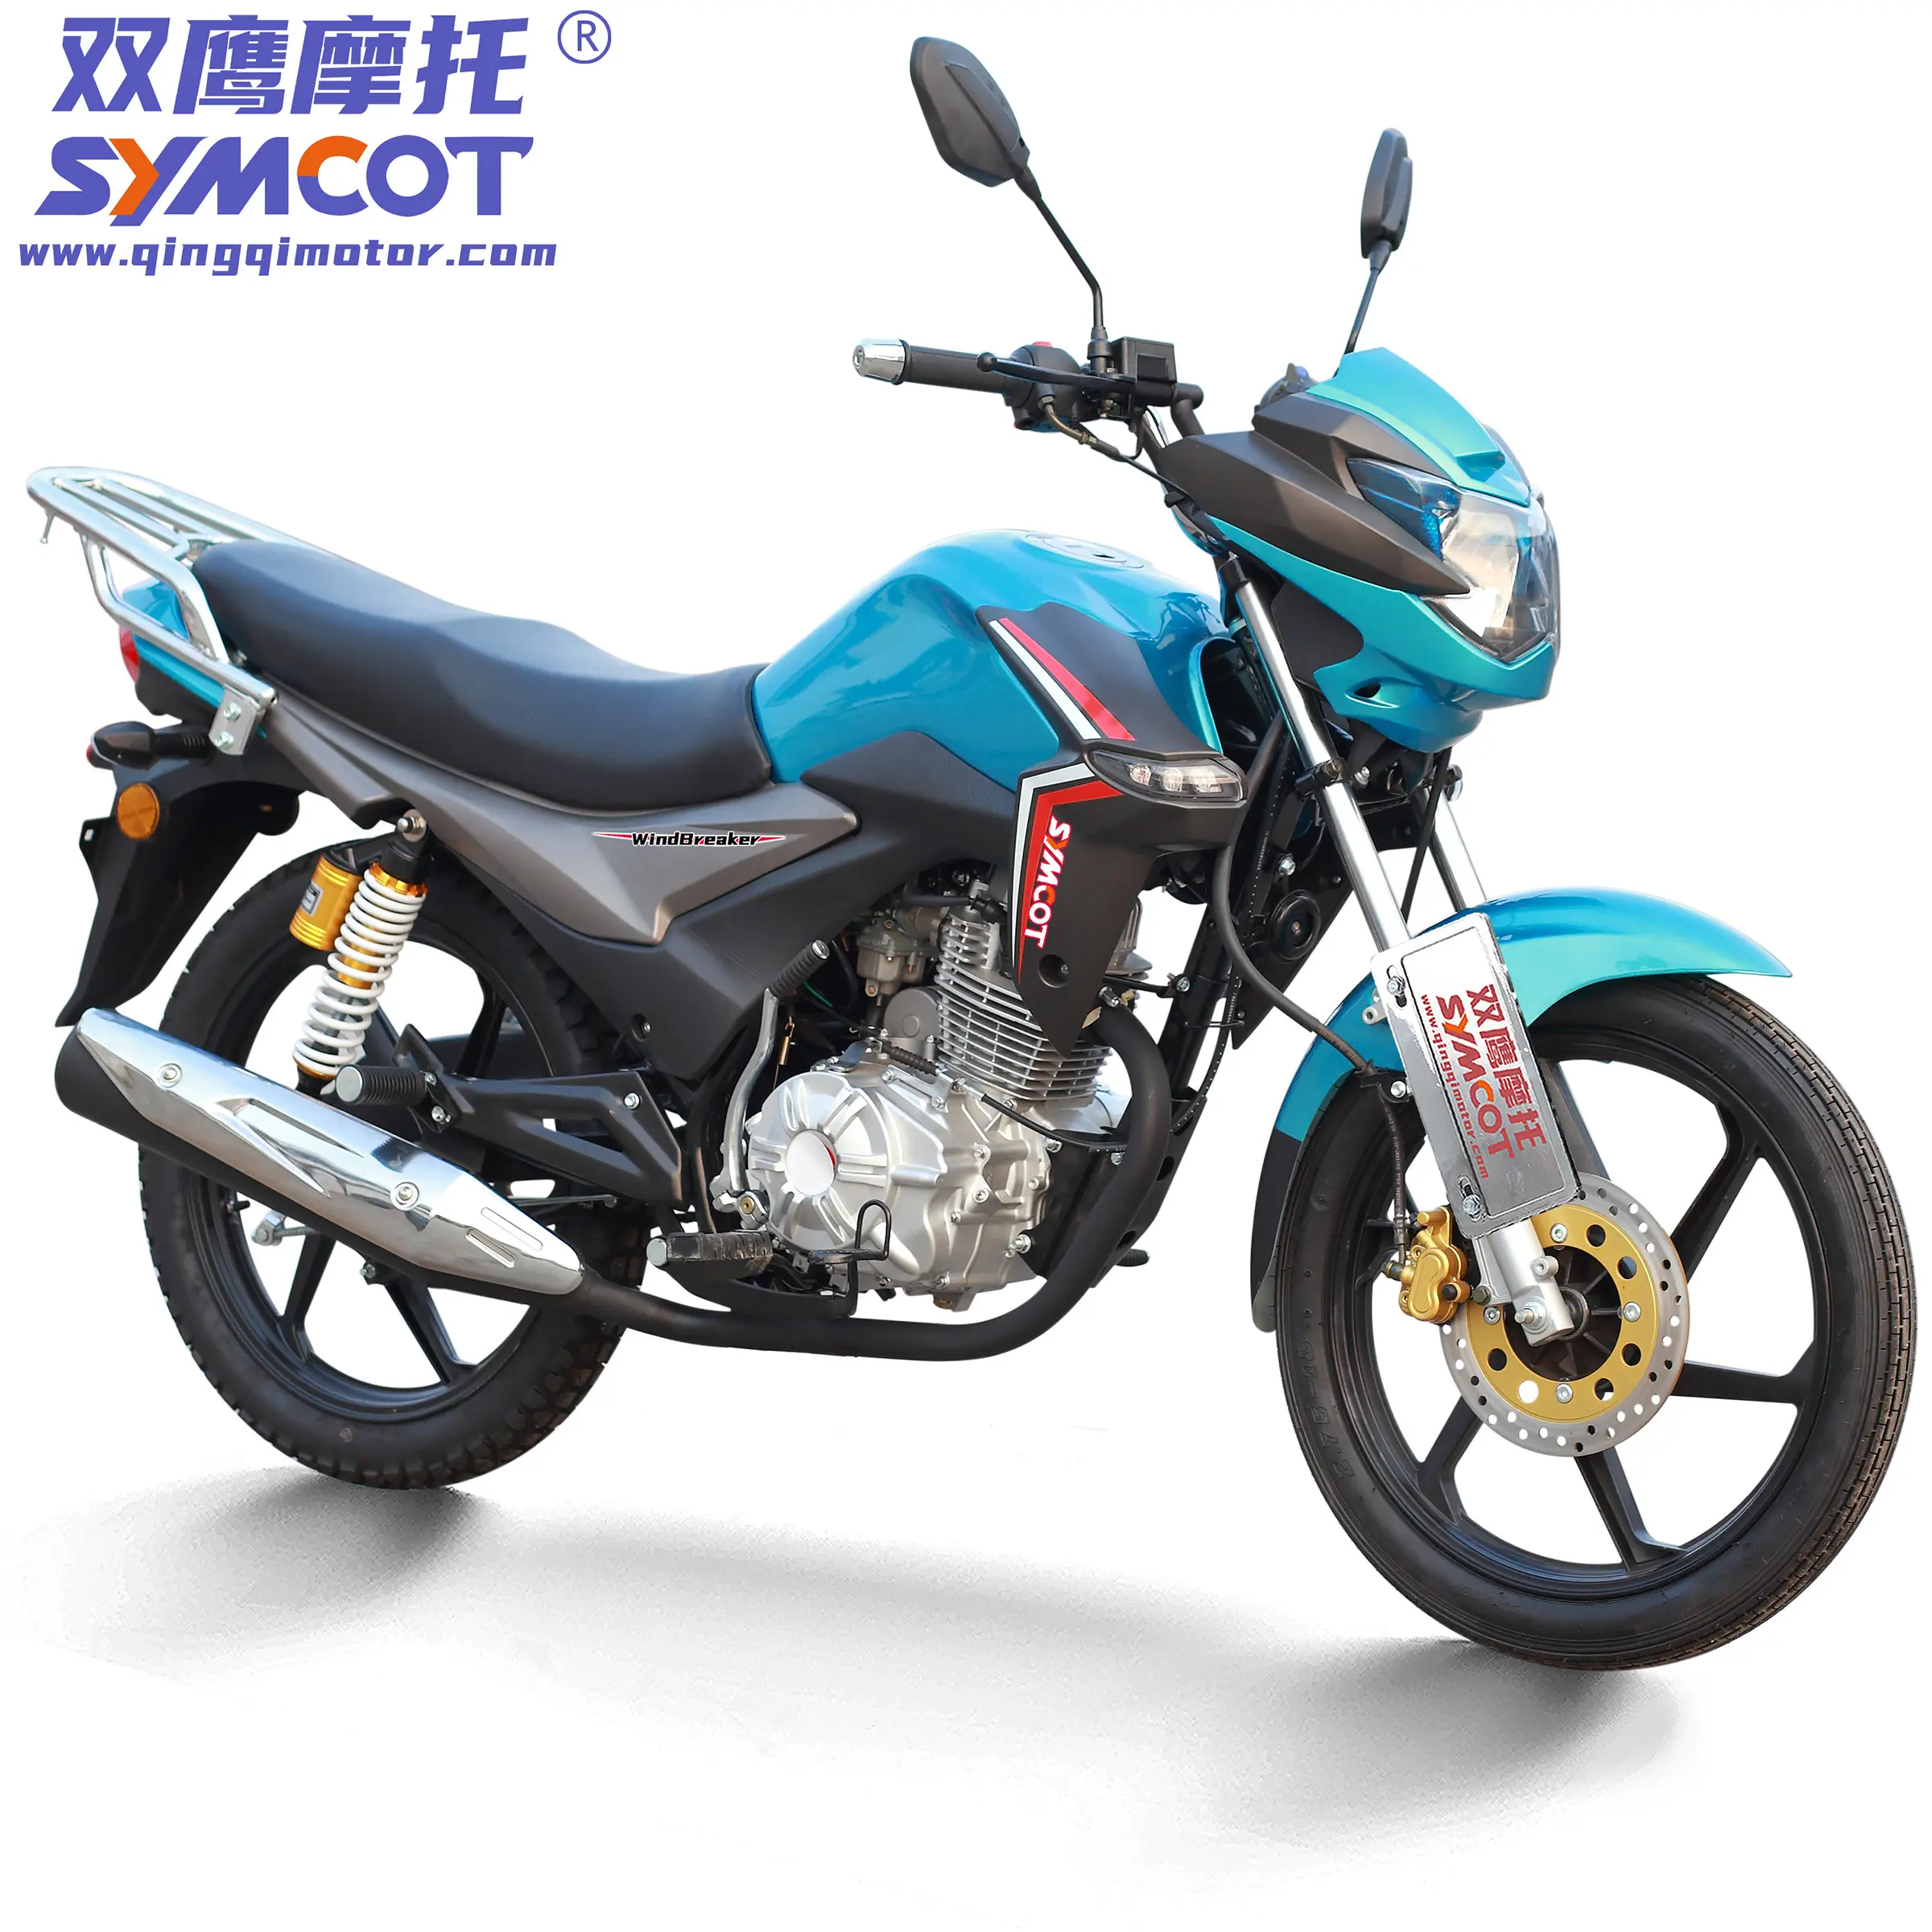 Windbreaker 150cc street motorcycle with 125cc 150cc 18 inch tire disc drum brake sells well in Middle East Fenghao